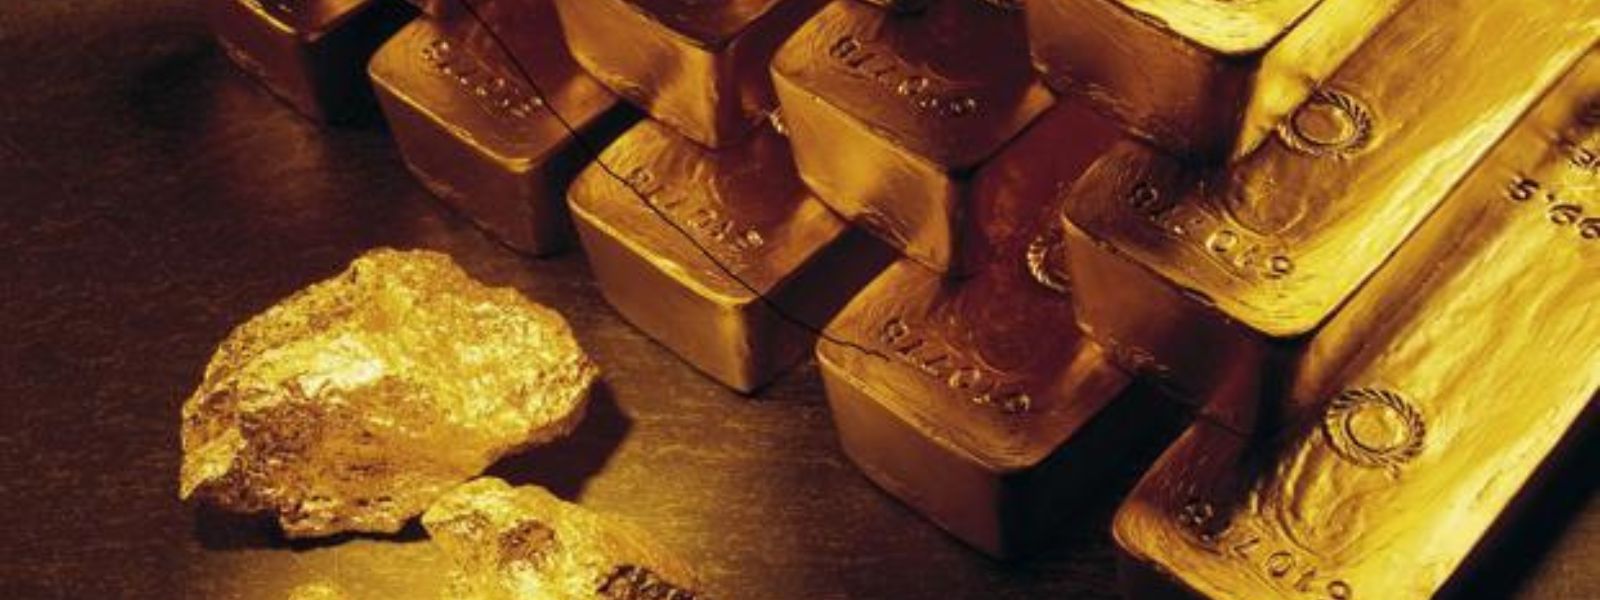 SL Airlines Employee arrested over smuggling gold